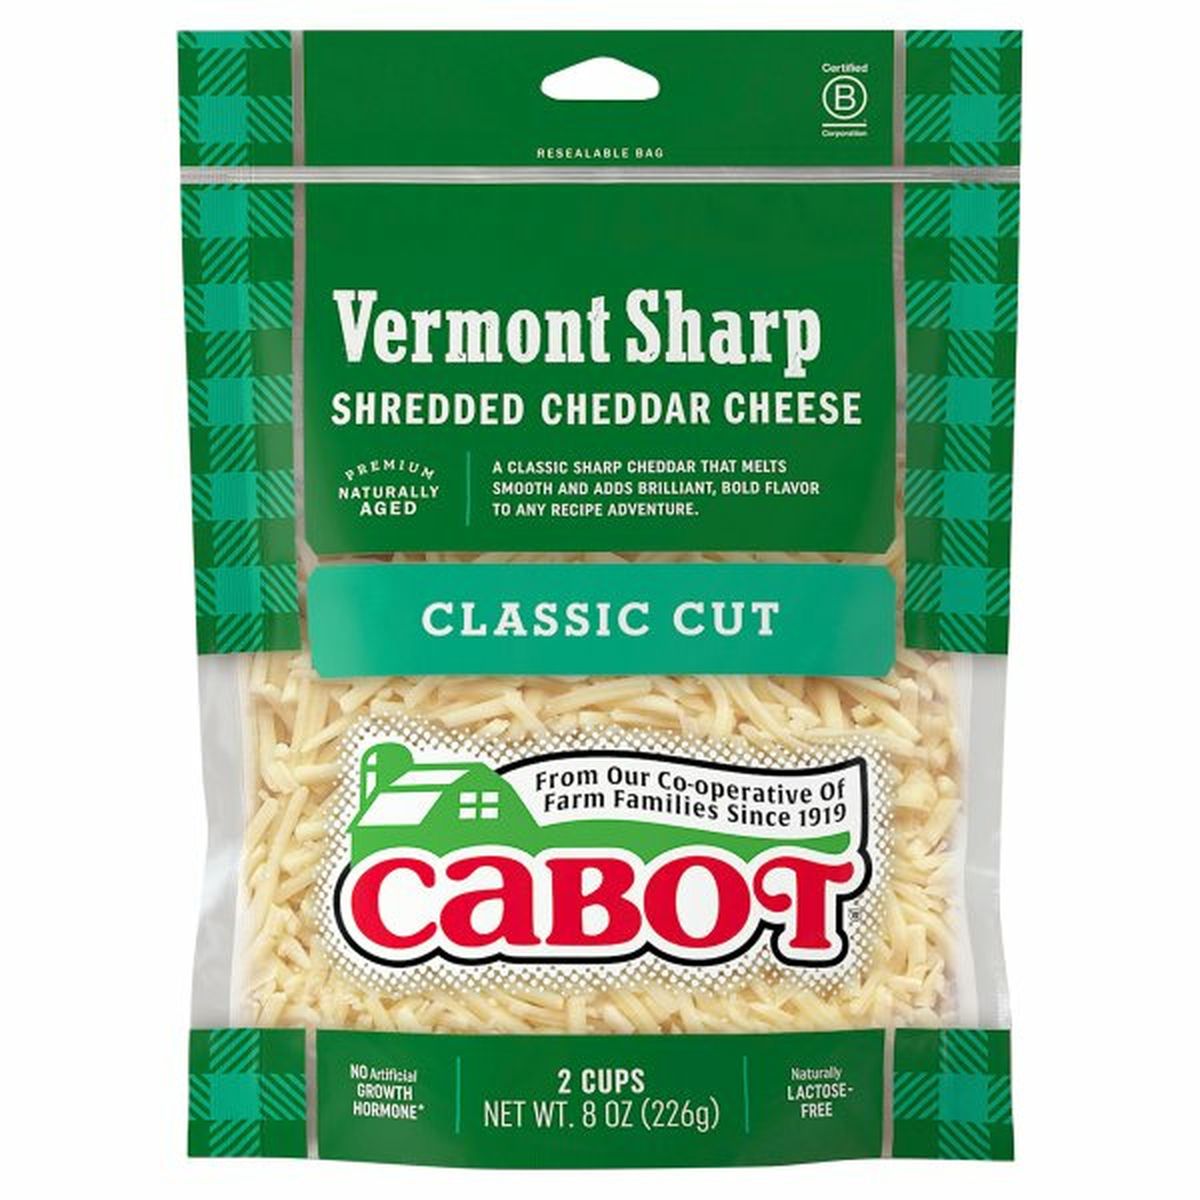 Calories in Cabot Shredded Cheese, Vermont Sharp Cheddar, Classic Cut